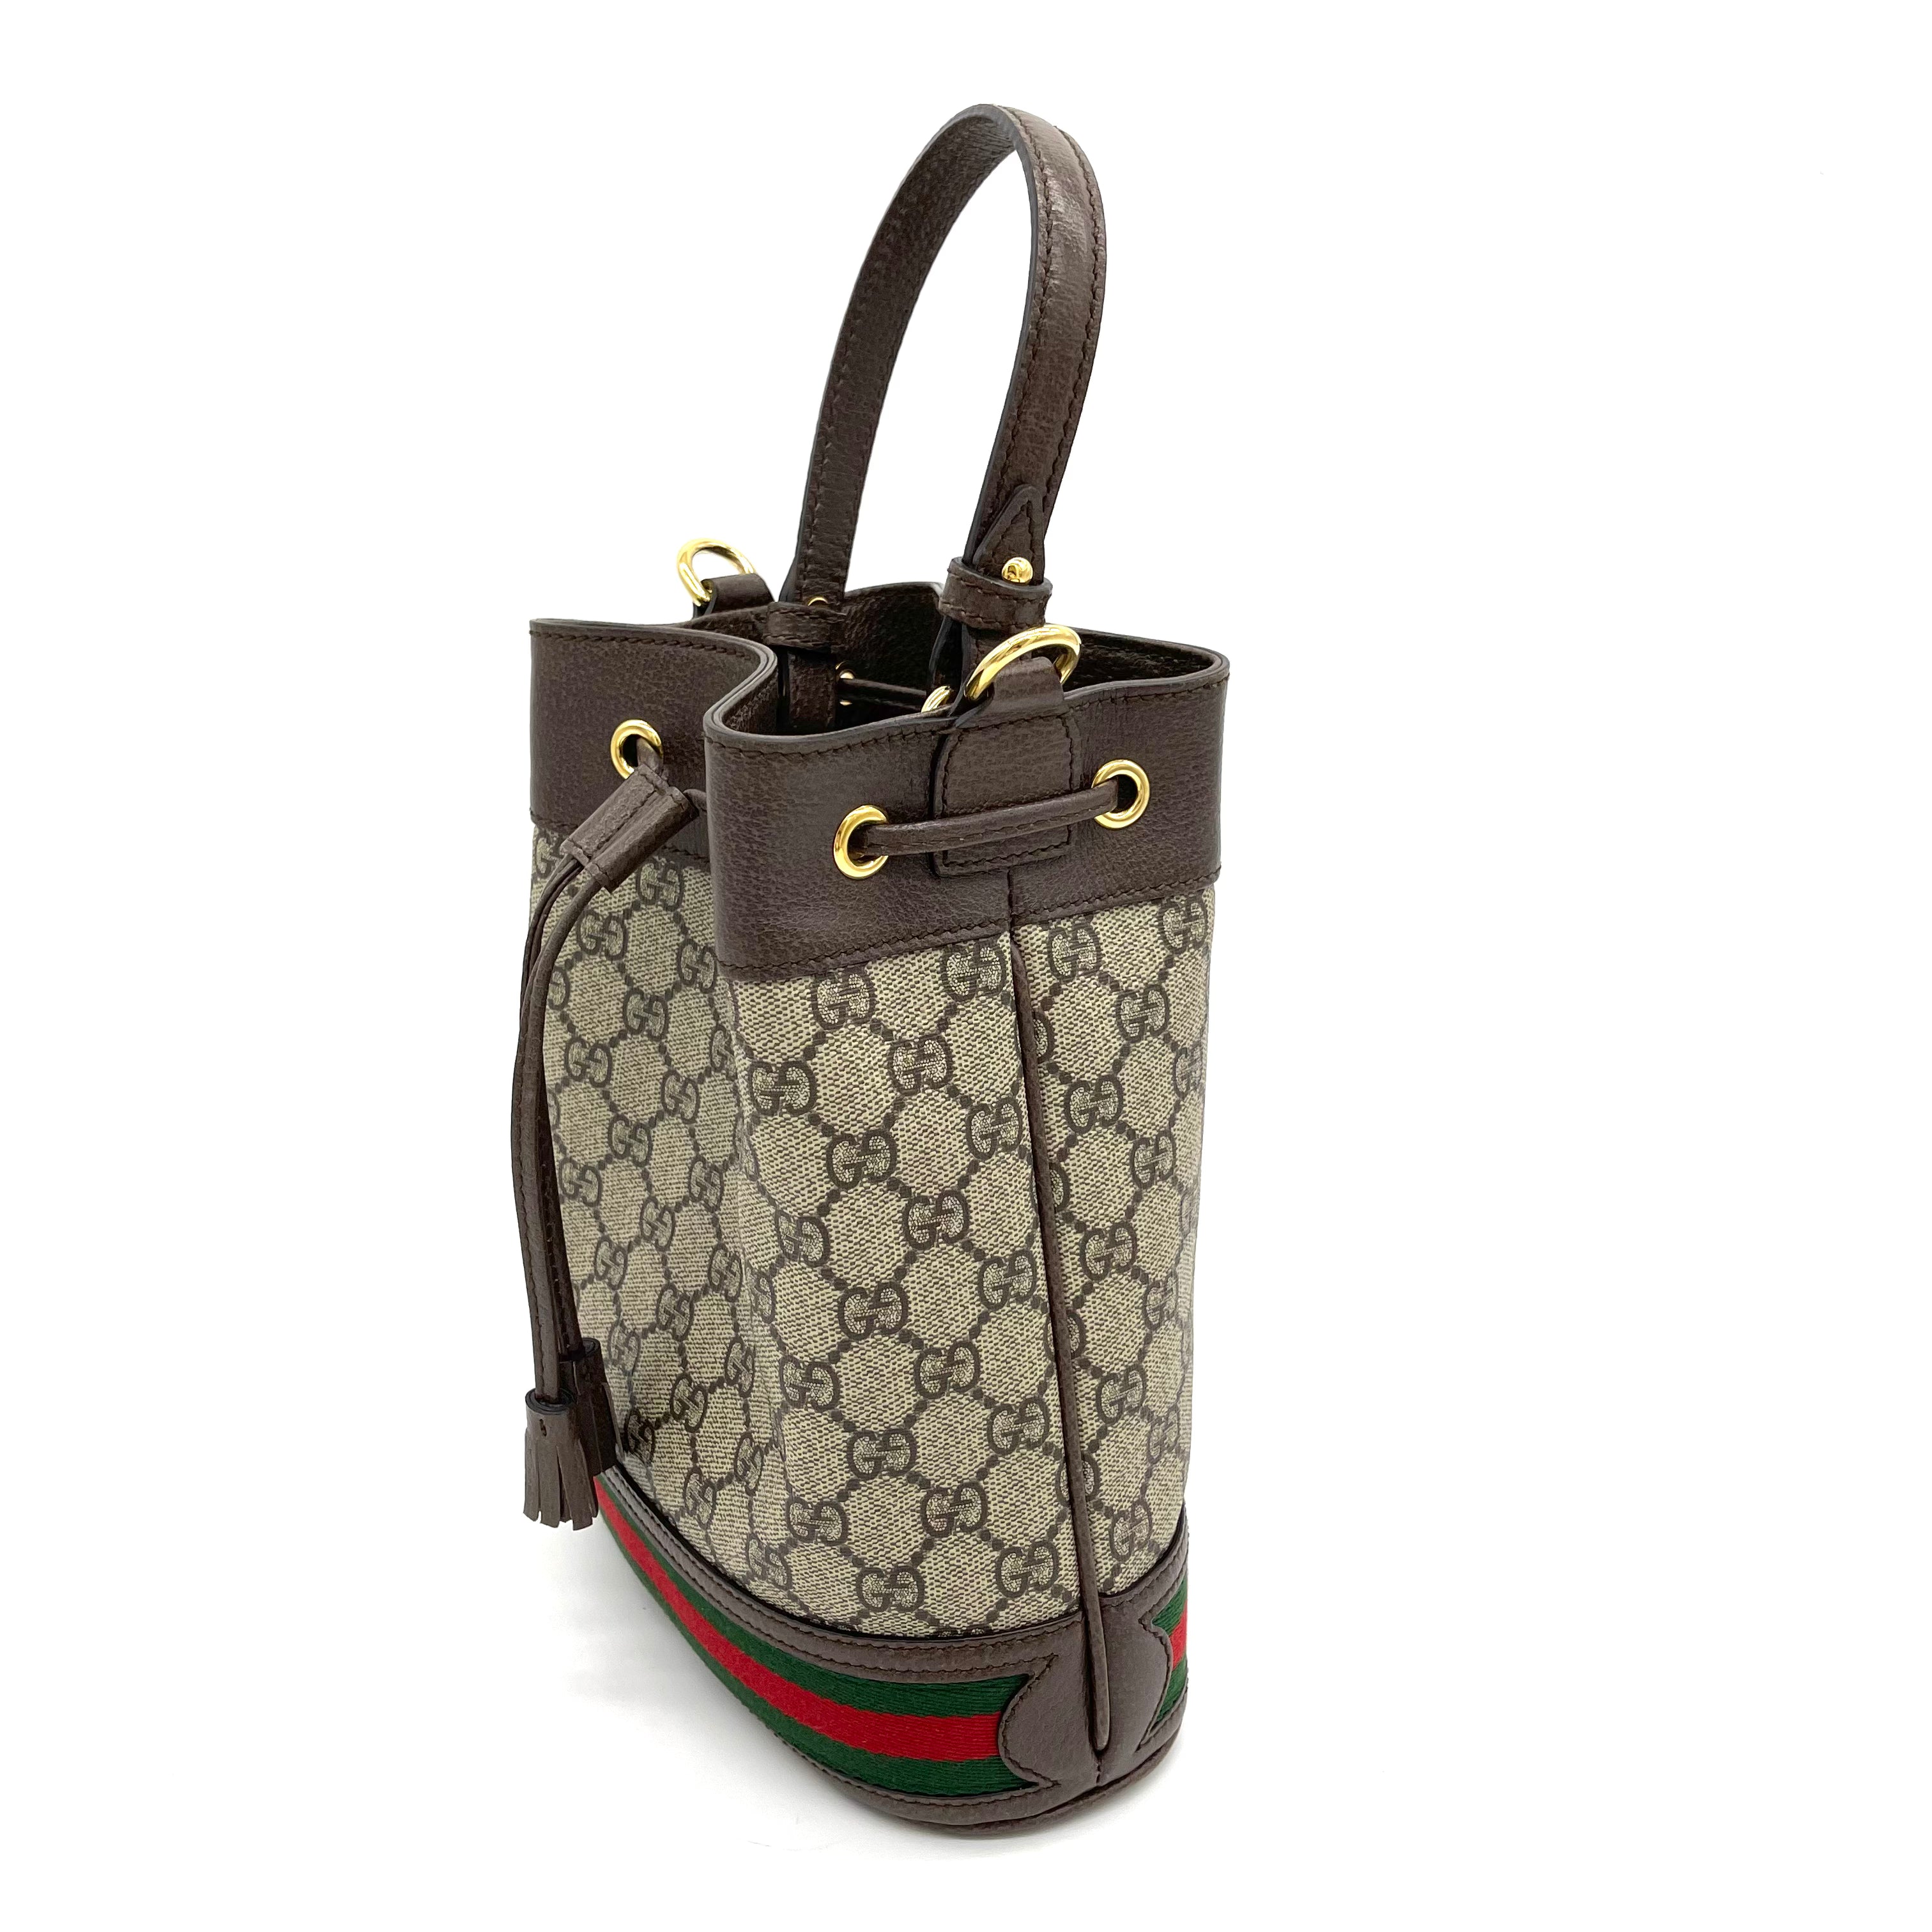 New GUCCI Ophidia GG small bucket bag 550621 520981